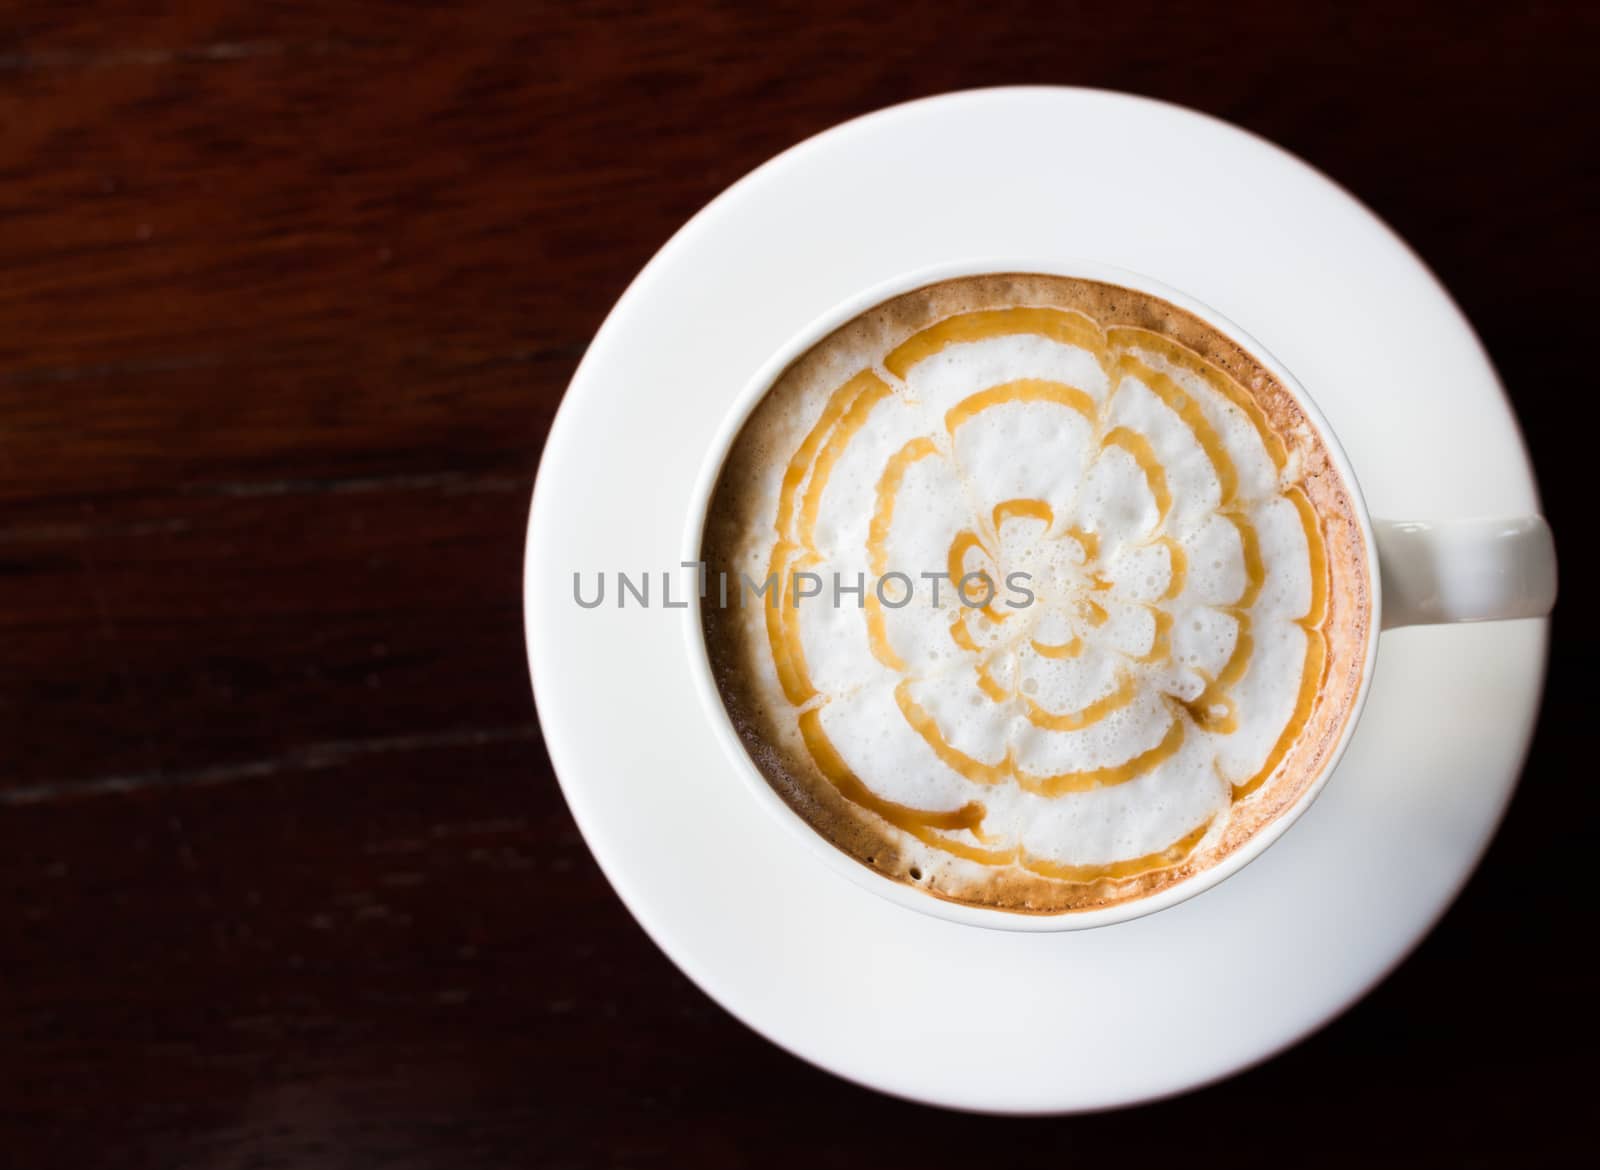 coffee cup on table